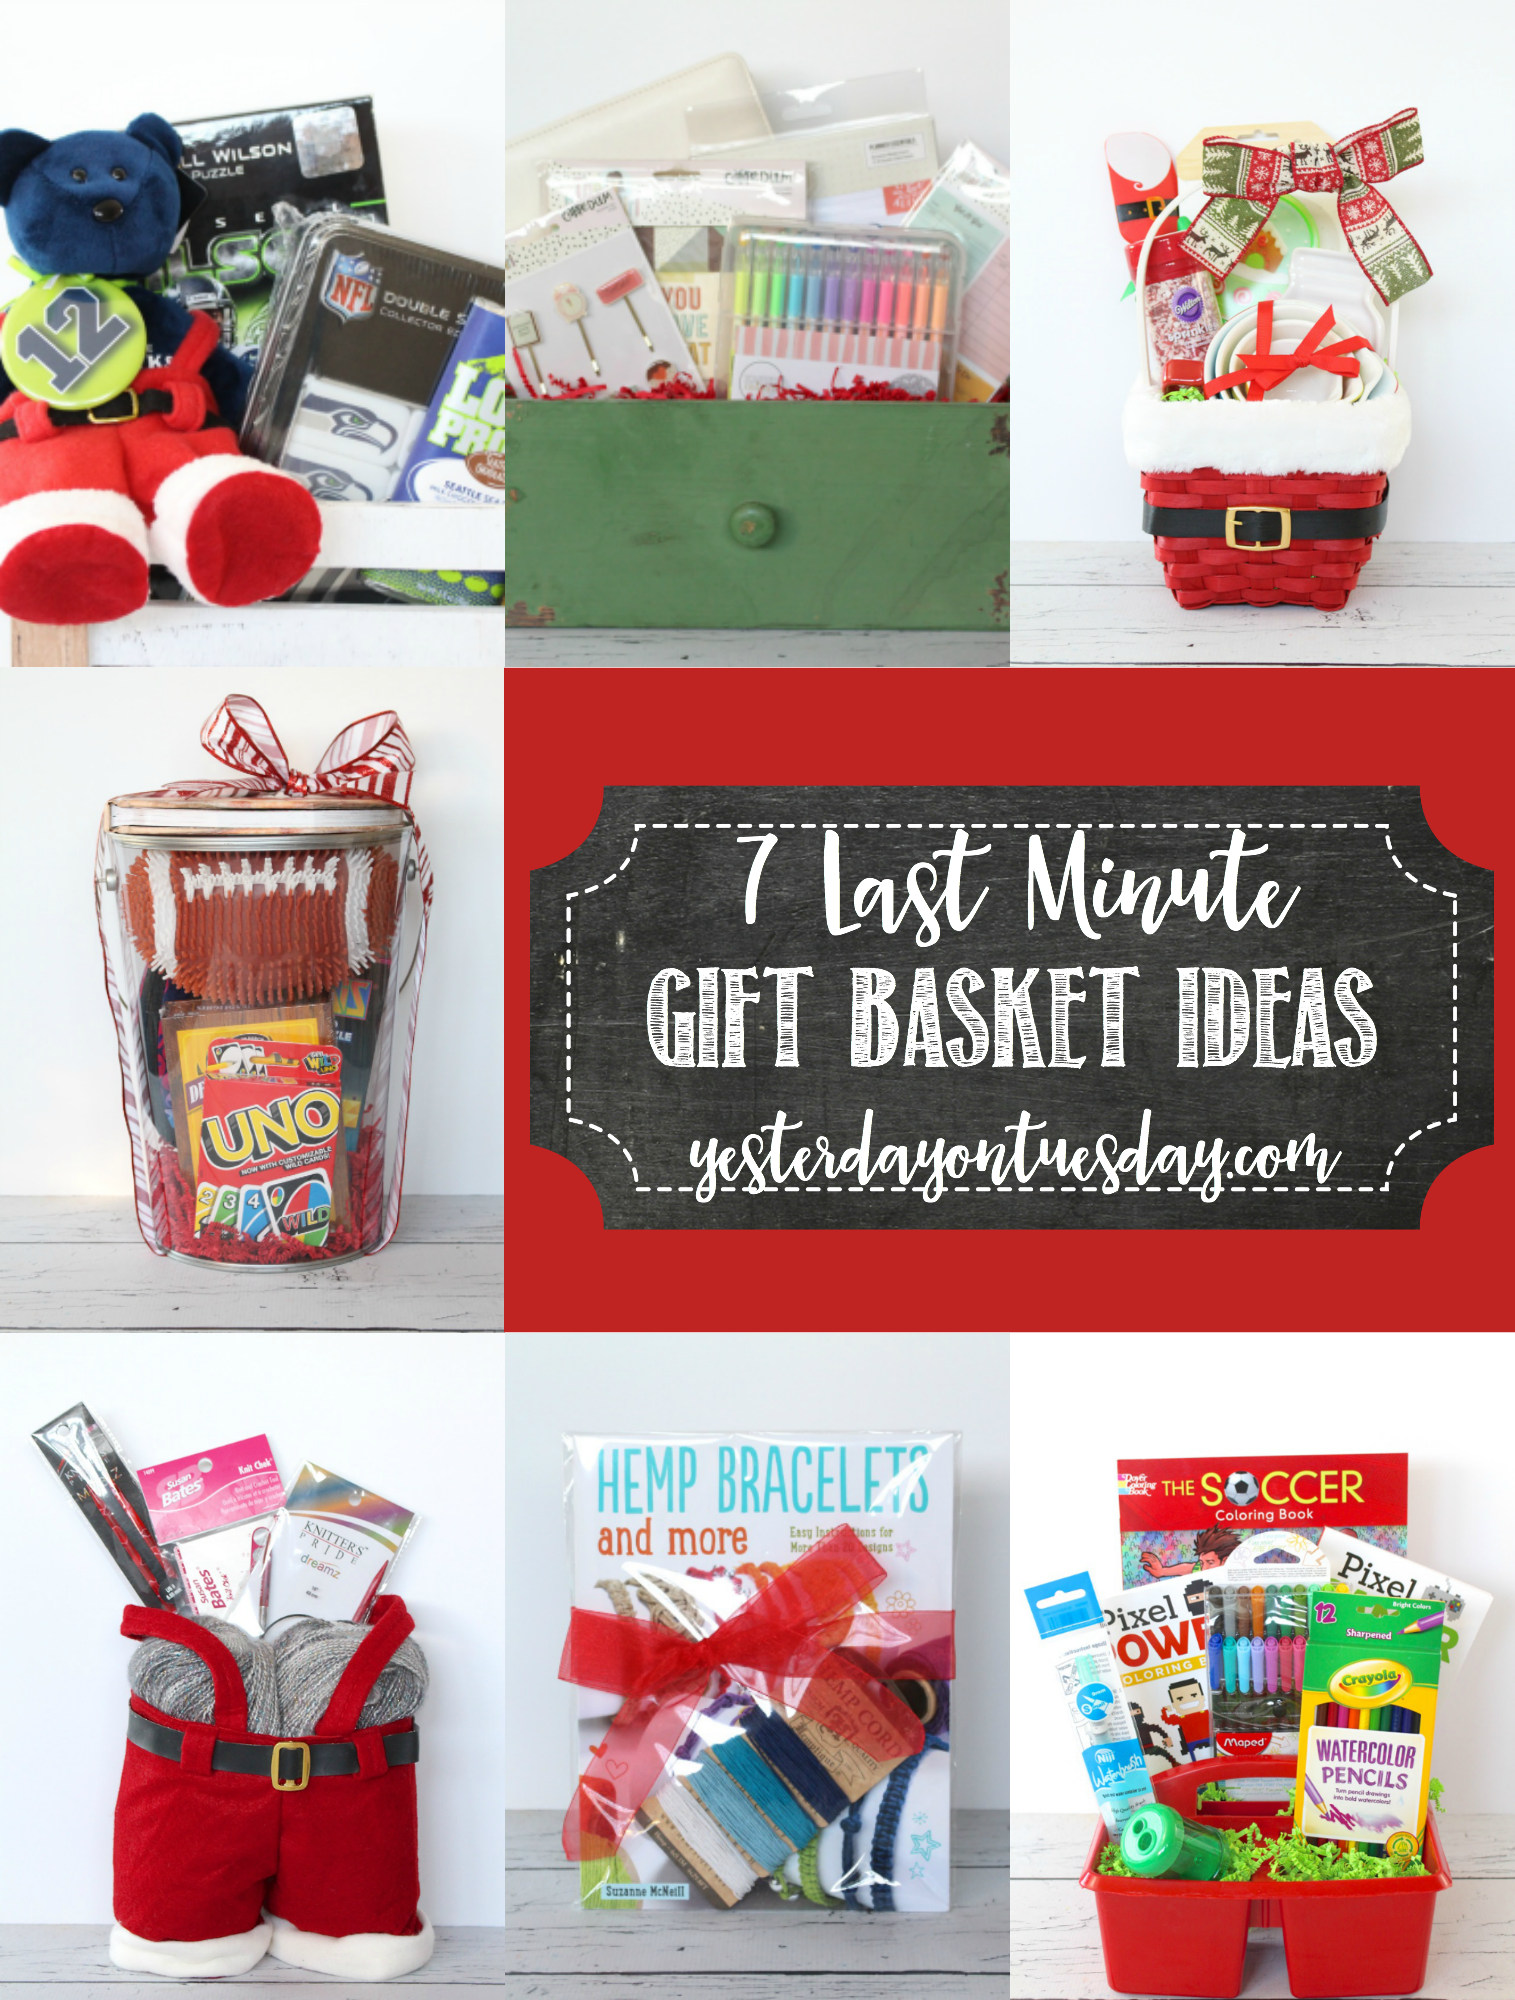 https://yesterdayontuesday.com/wp-content/uploads/2016/12/7-Last-Minute-Gift-Basket-Ideas.png